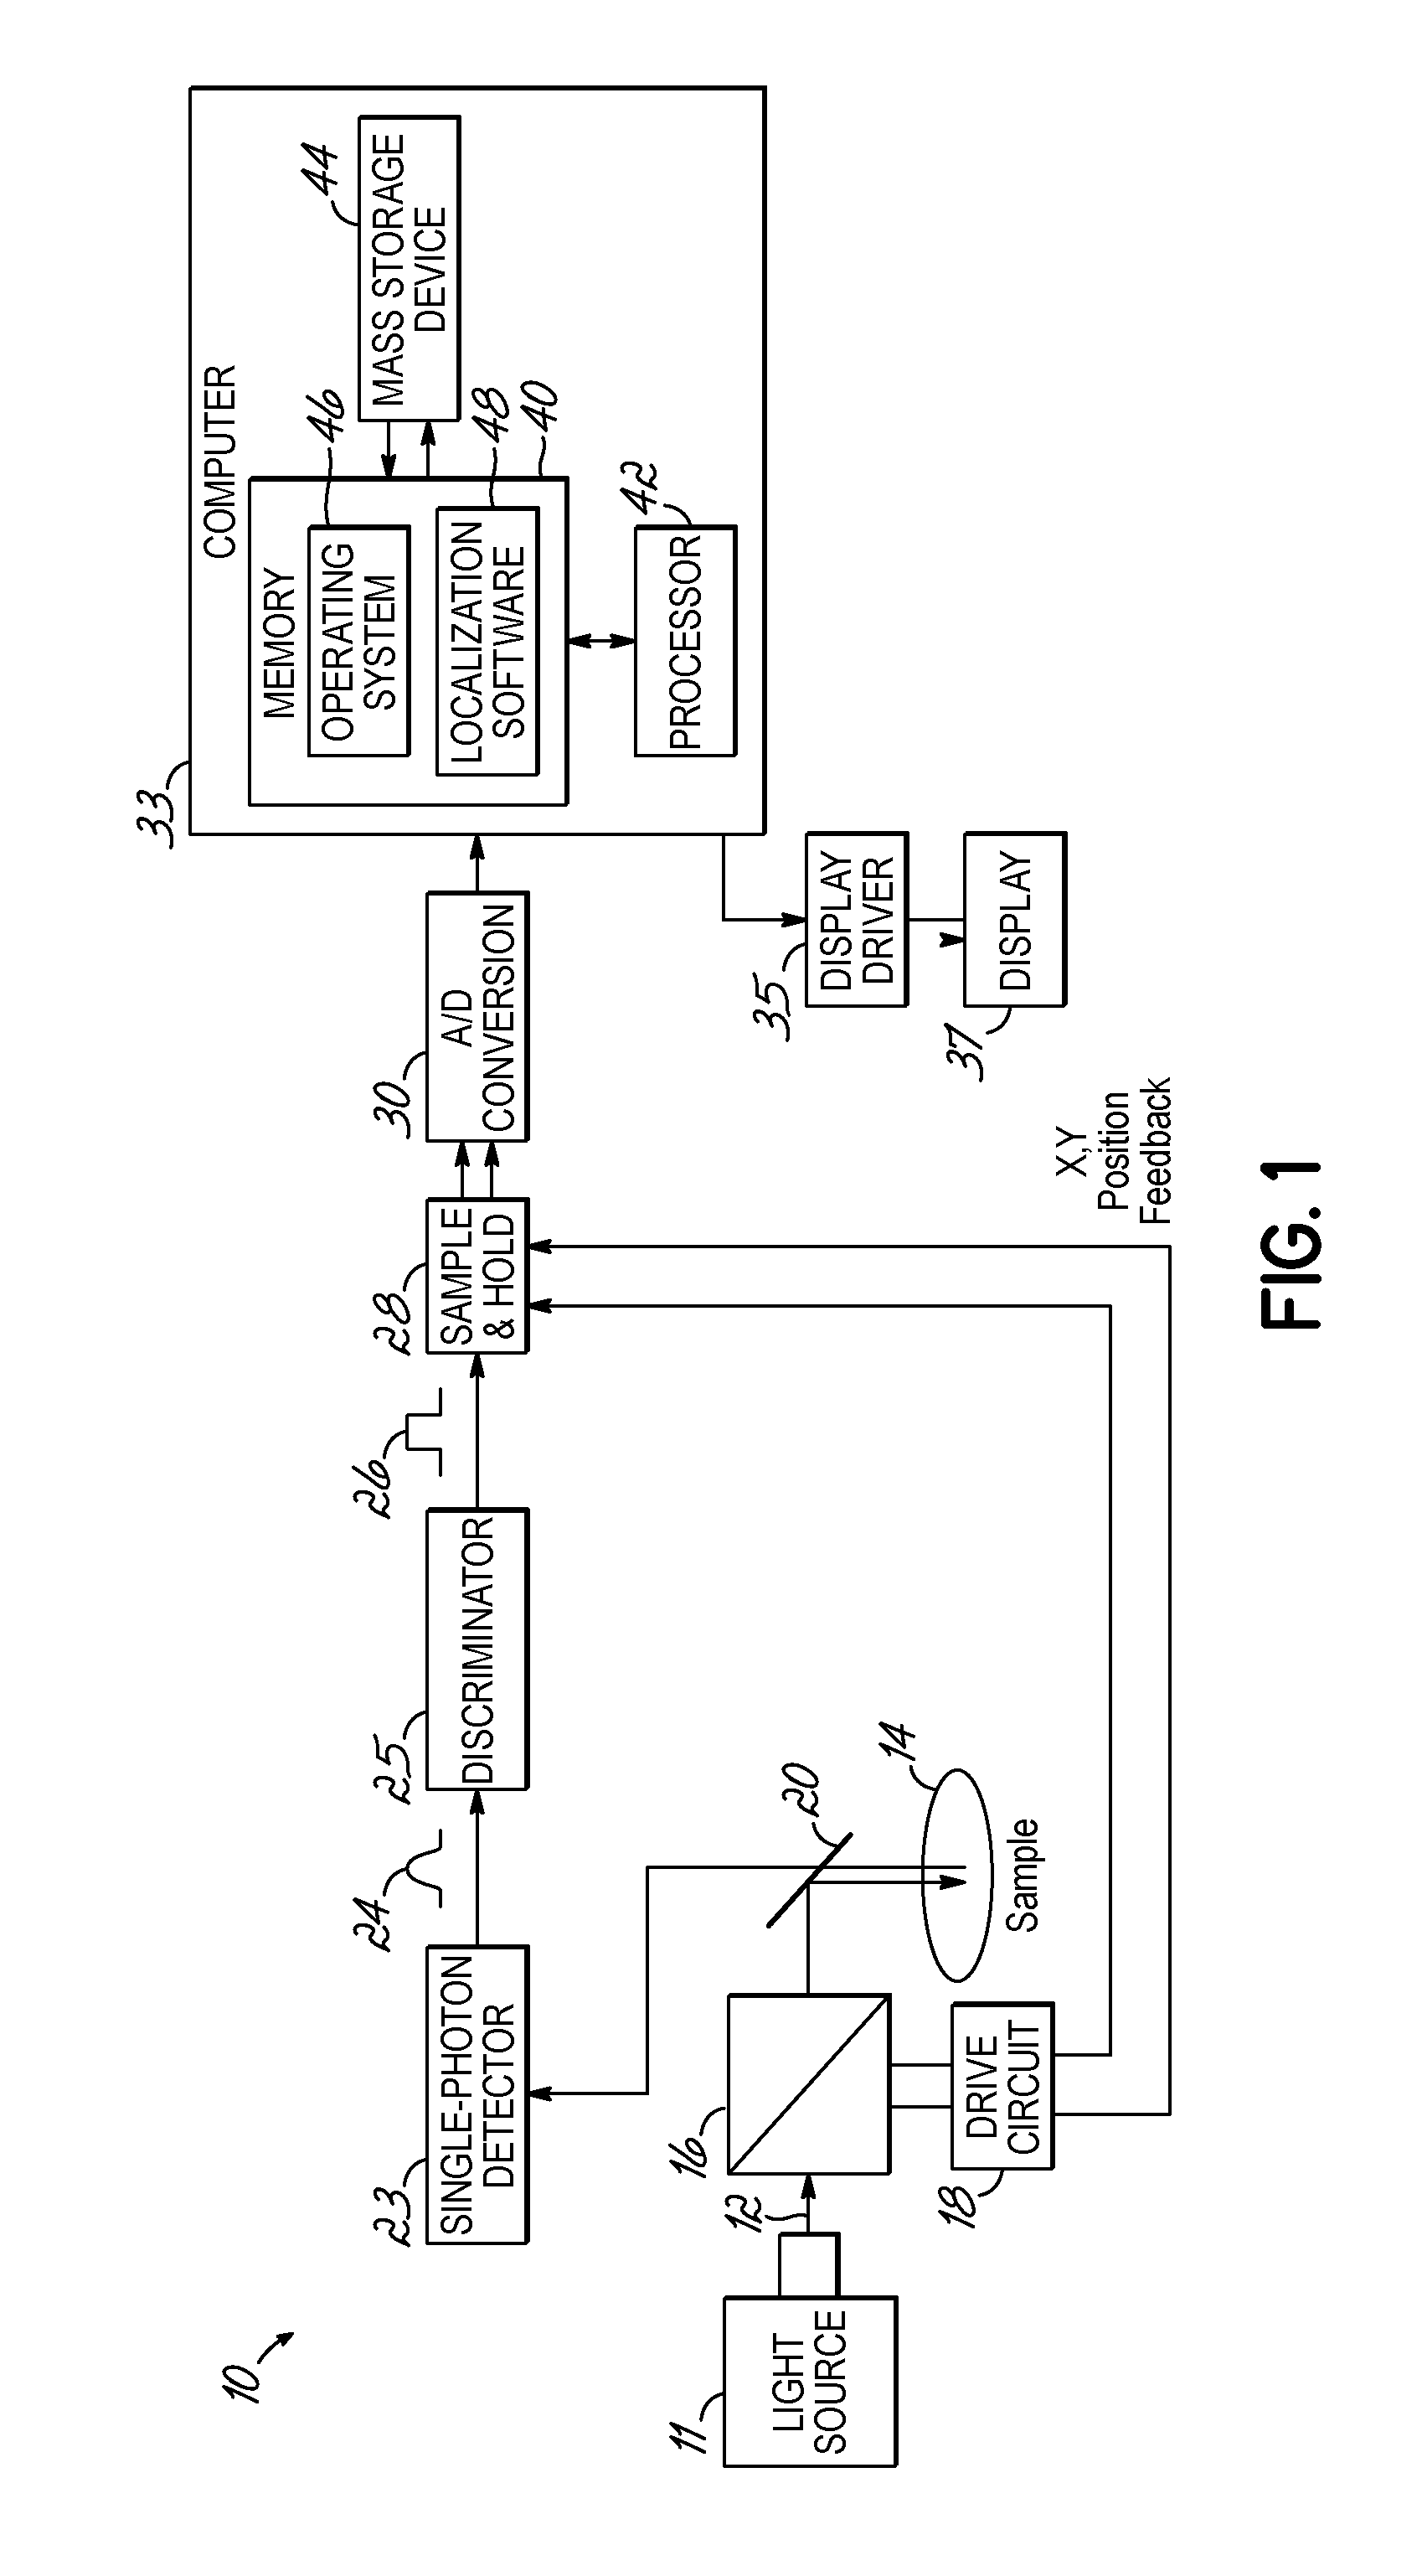 Method, system, and computer program product for localizing photons and a light source emitting the photons